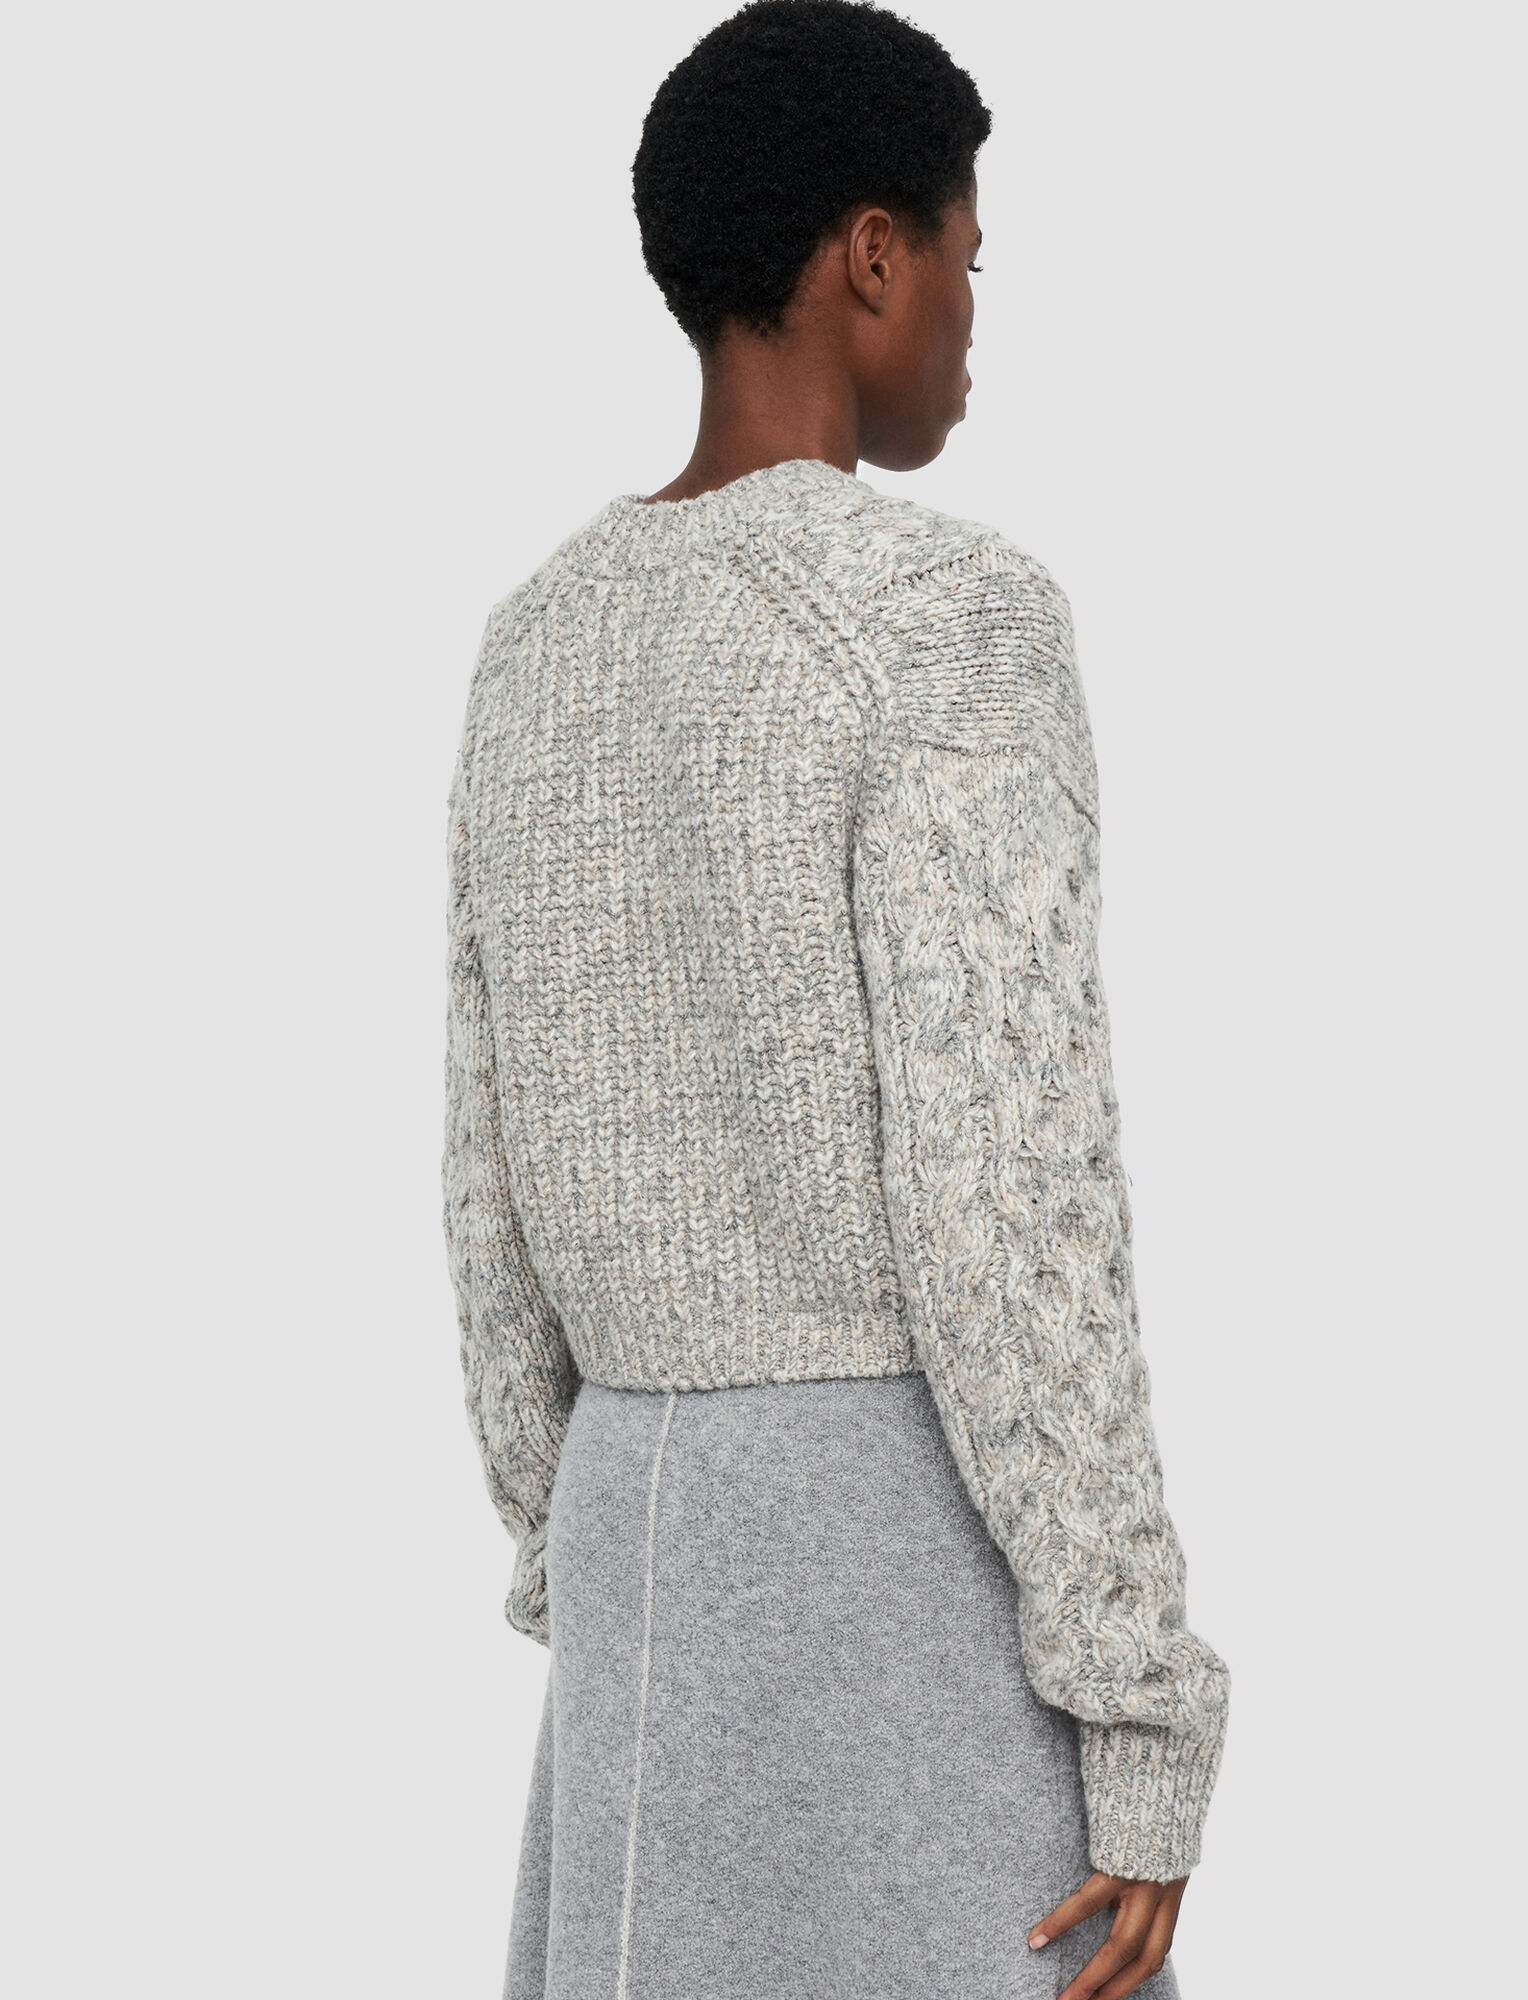 Joseph, Cashmere Tweed Cropped Jumper, in Light grey